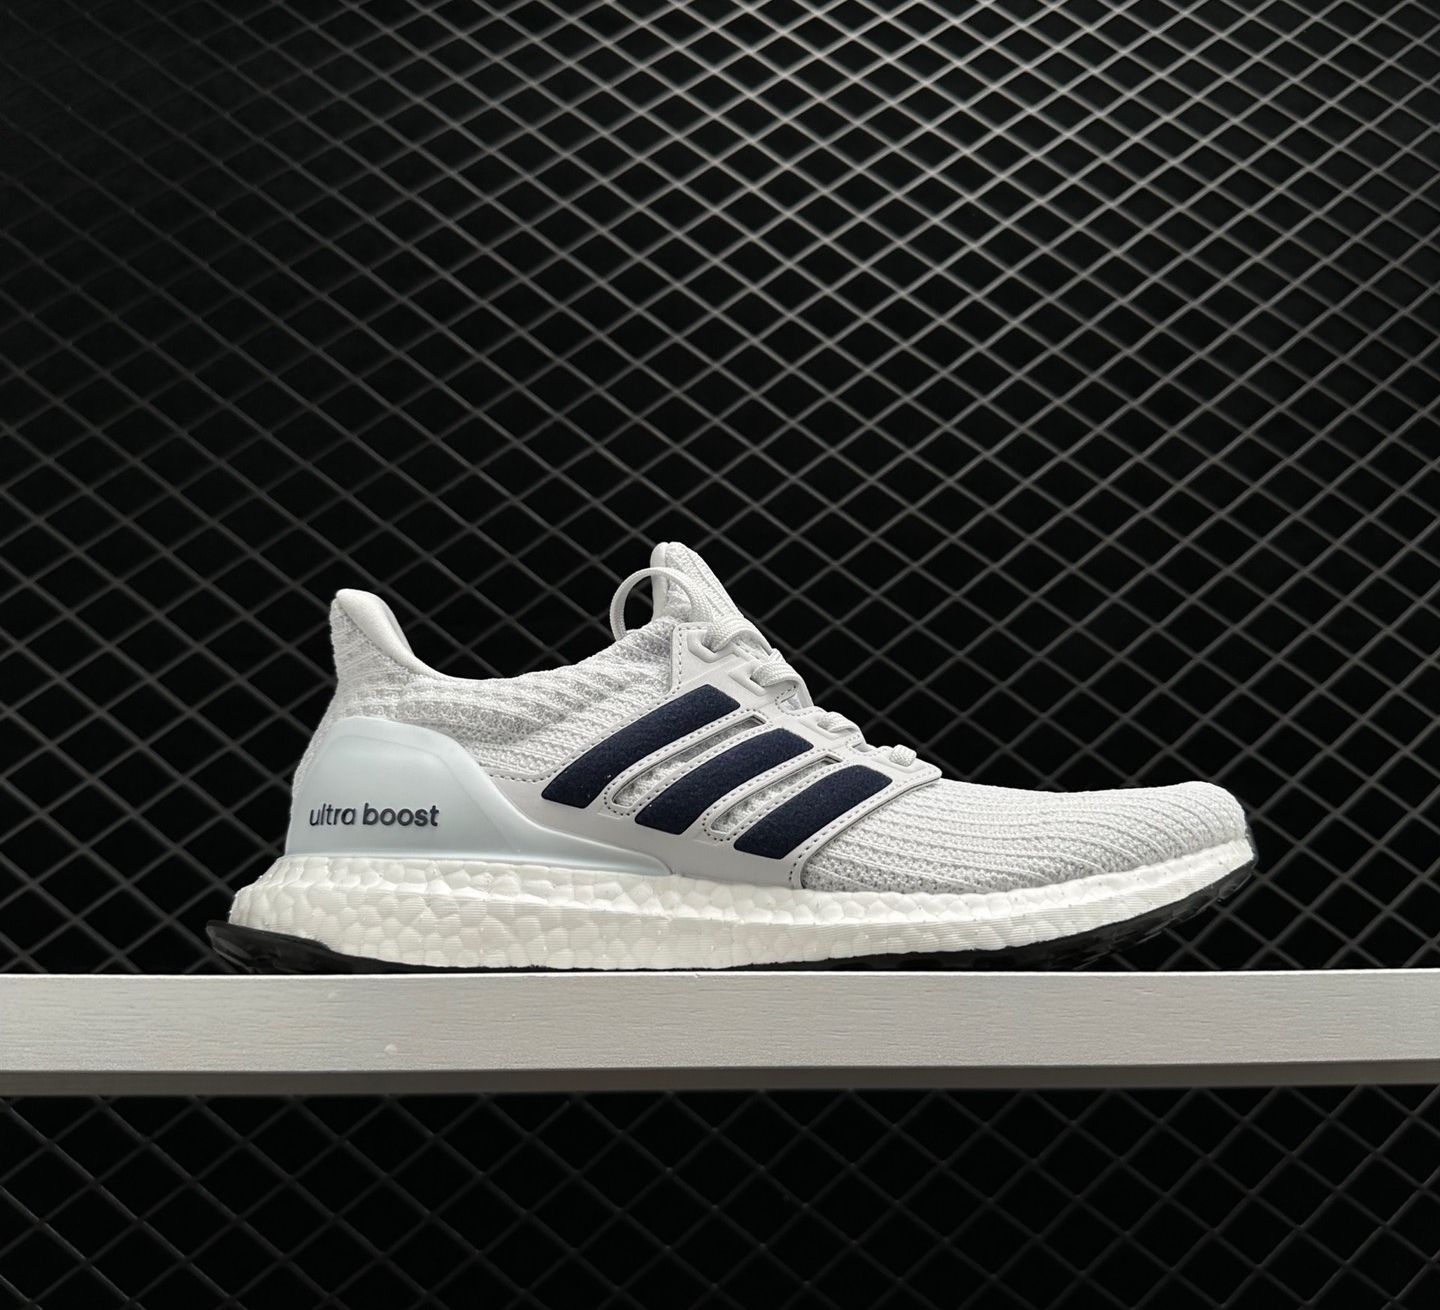 Adidas Ultraboost 4.0 DNA Shoes White Blue FY9337 - Stylish and Comfortable Footwear